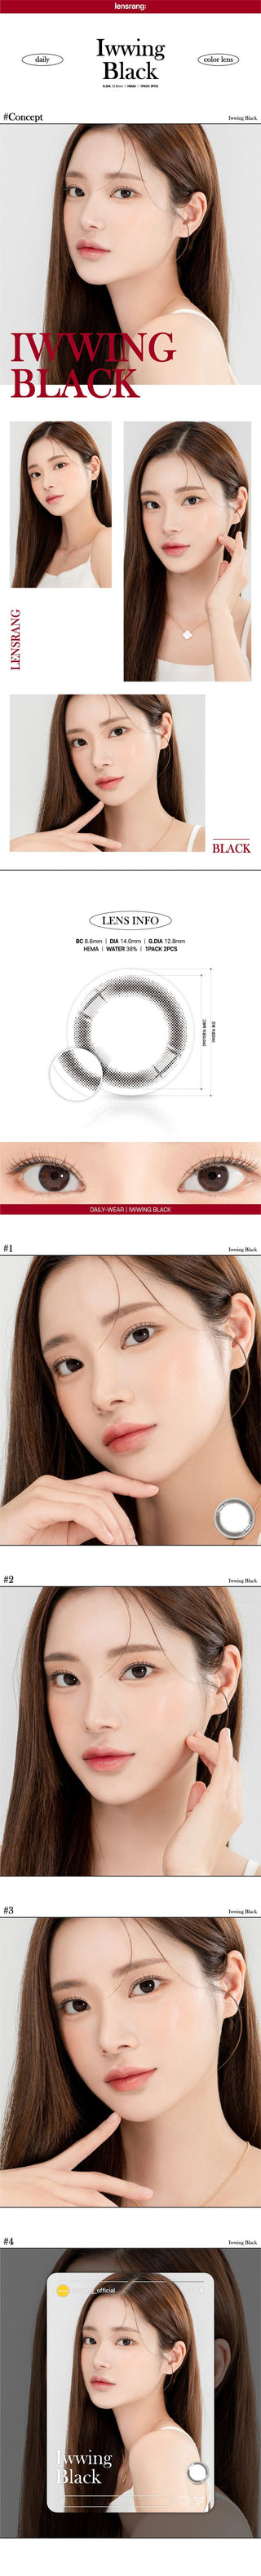 Model demonstrating a Kpop-inspired look with Lensrang Iwwing Black coloured contact lenses, demonstrating the brightening and enlarging effect of the circle contact lenses on her dark eyes.